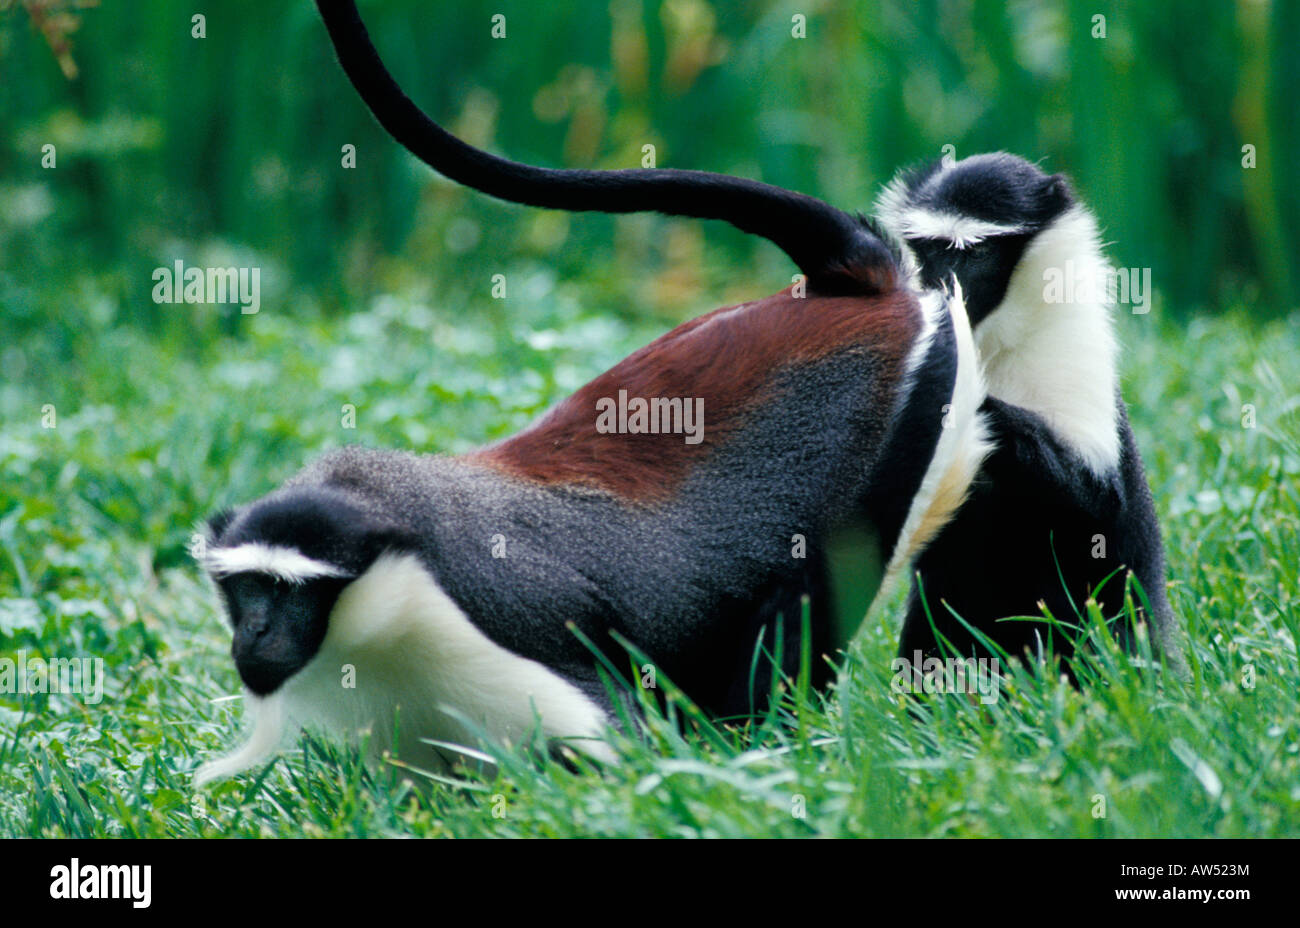 Dianameerkatze Diana Meerkatze Cercopithecus diana cercopitheque de diane Diana Monkey searching for insects in the grass Affen Stock Photo